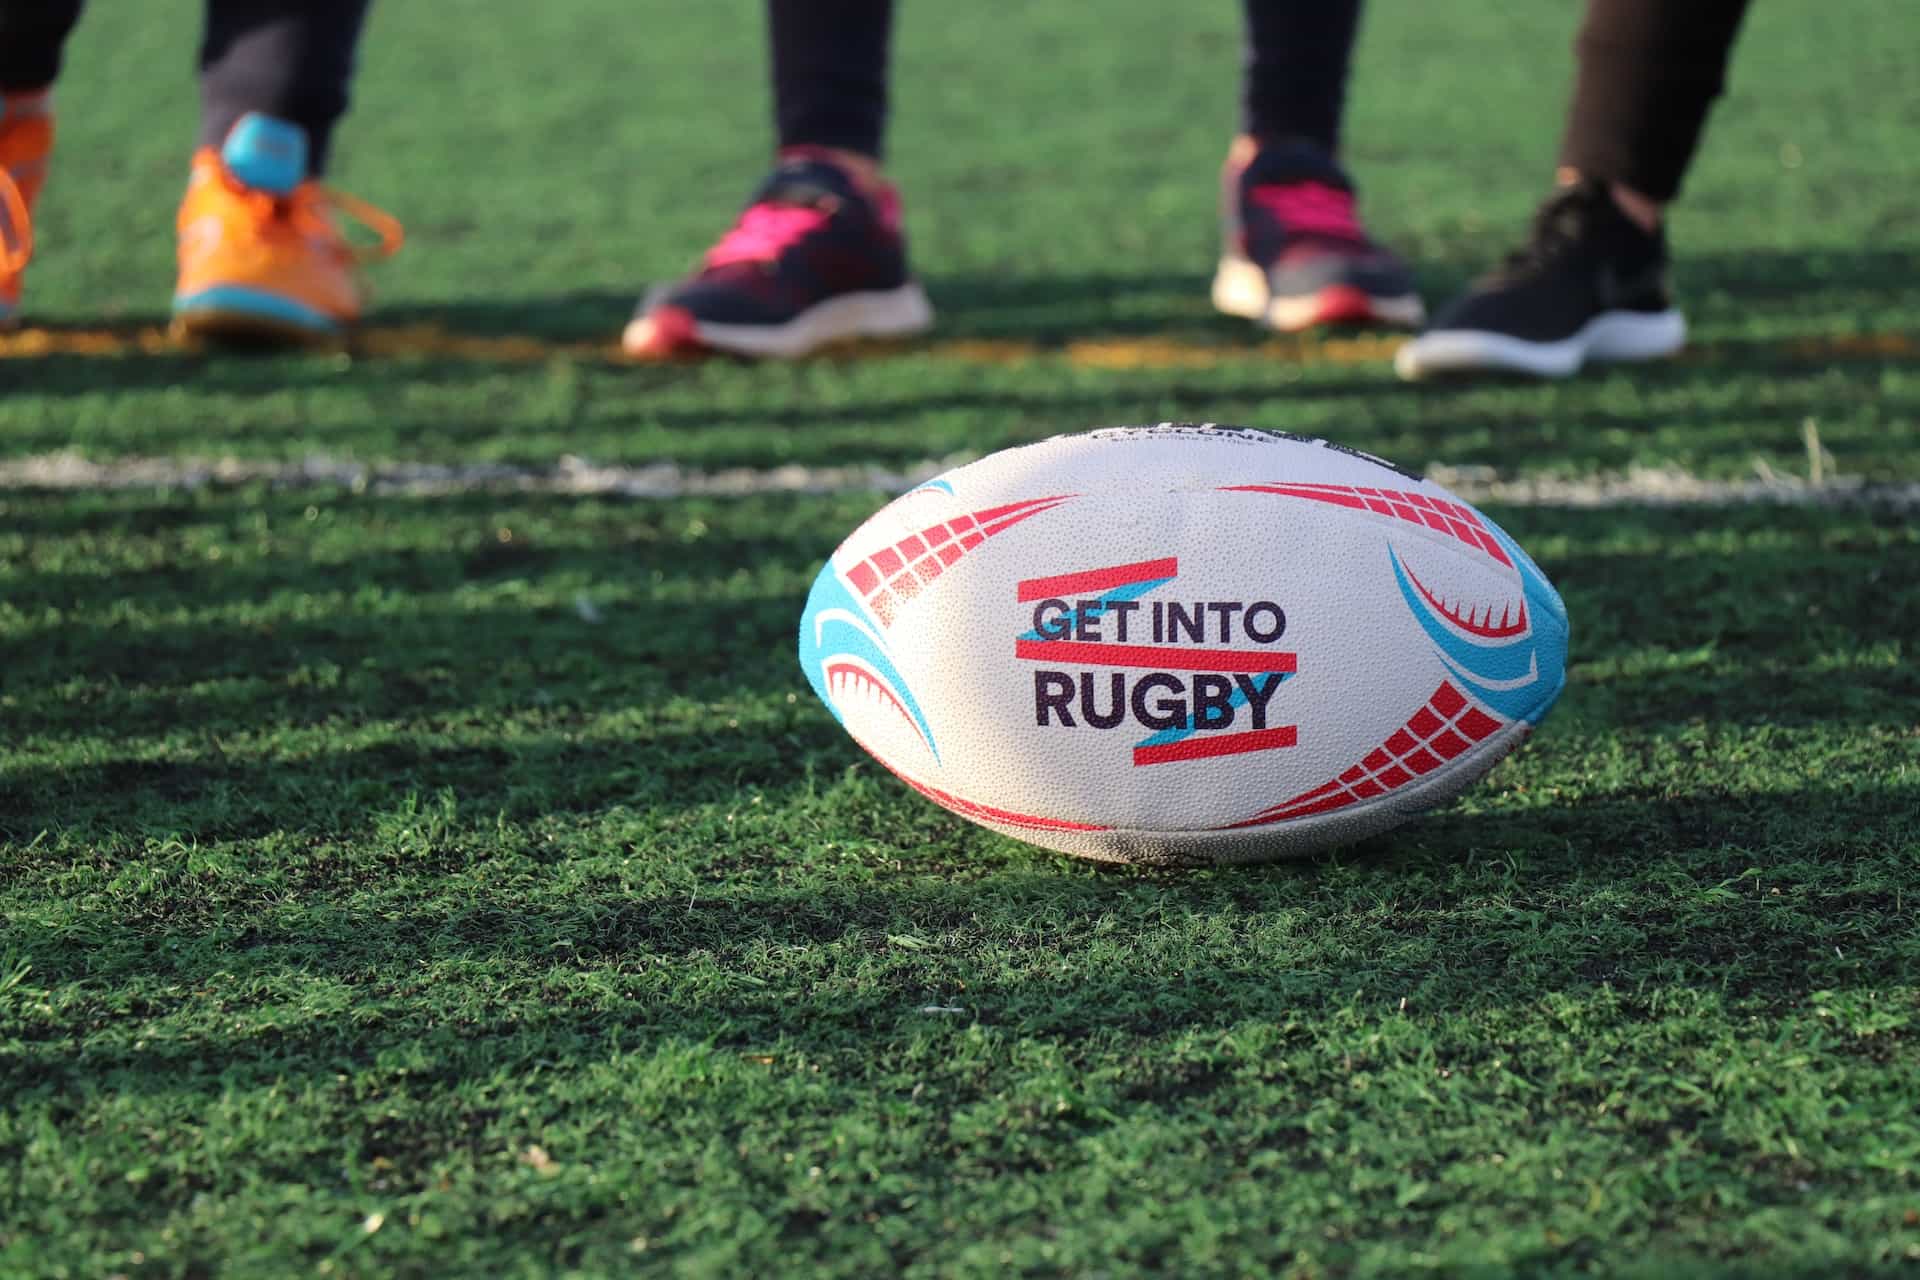 A rugby ball sits on a grass field with people standing in tennis shoes in the background.